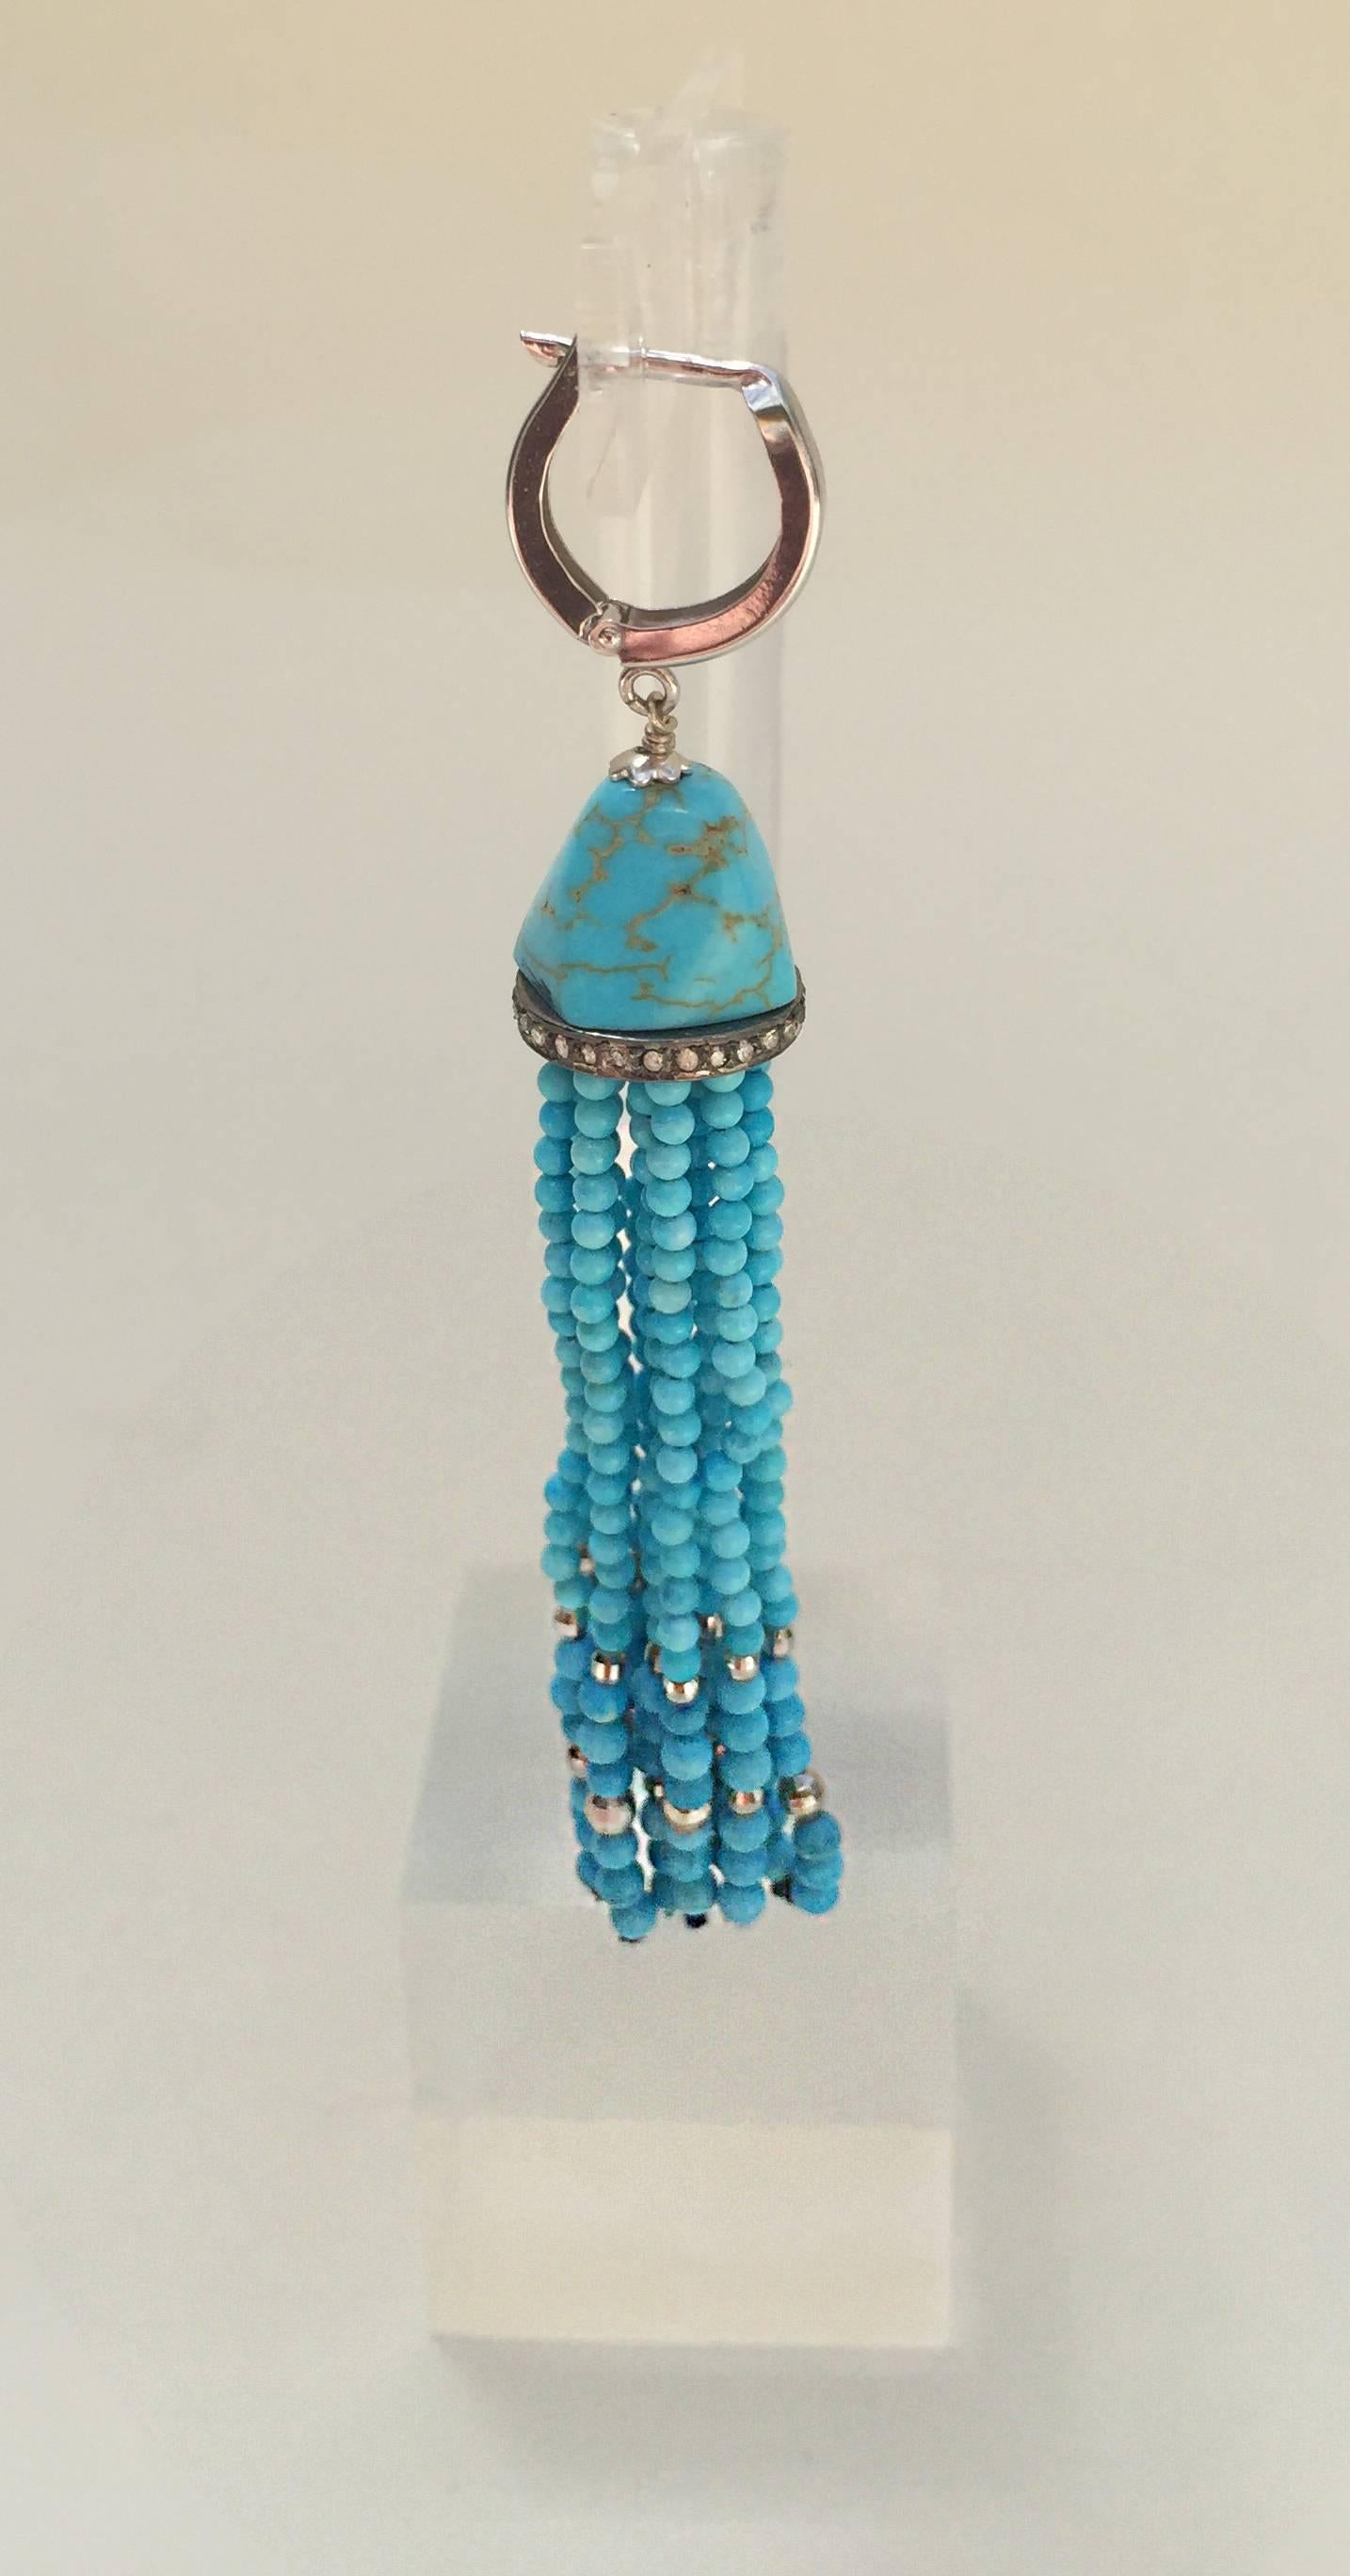 These beautiful turquoise tassel earrings are accented with silver rhodium plated faceted beads. Bringing the strands together is a large turquoise bead and diamond encrusted silver roundel. Completing the look is 14 k white gold lever backs that